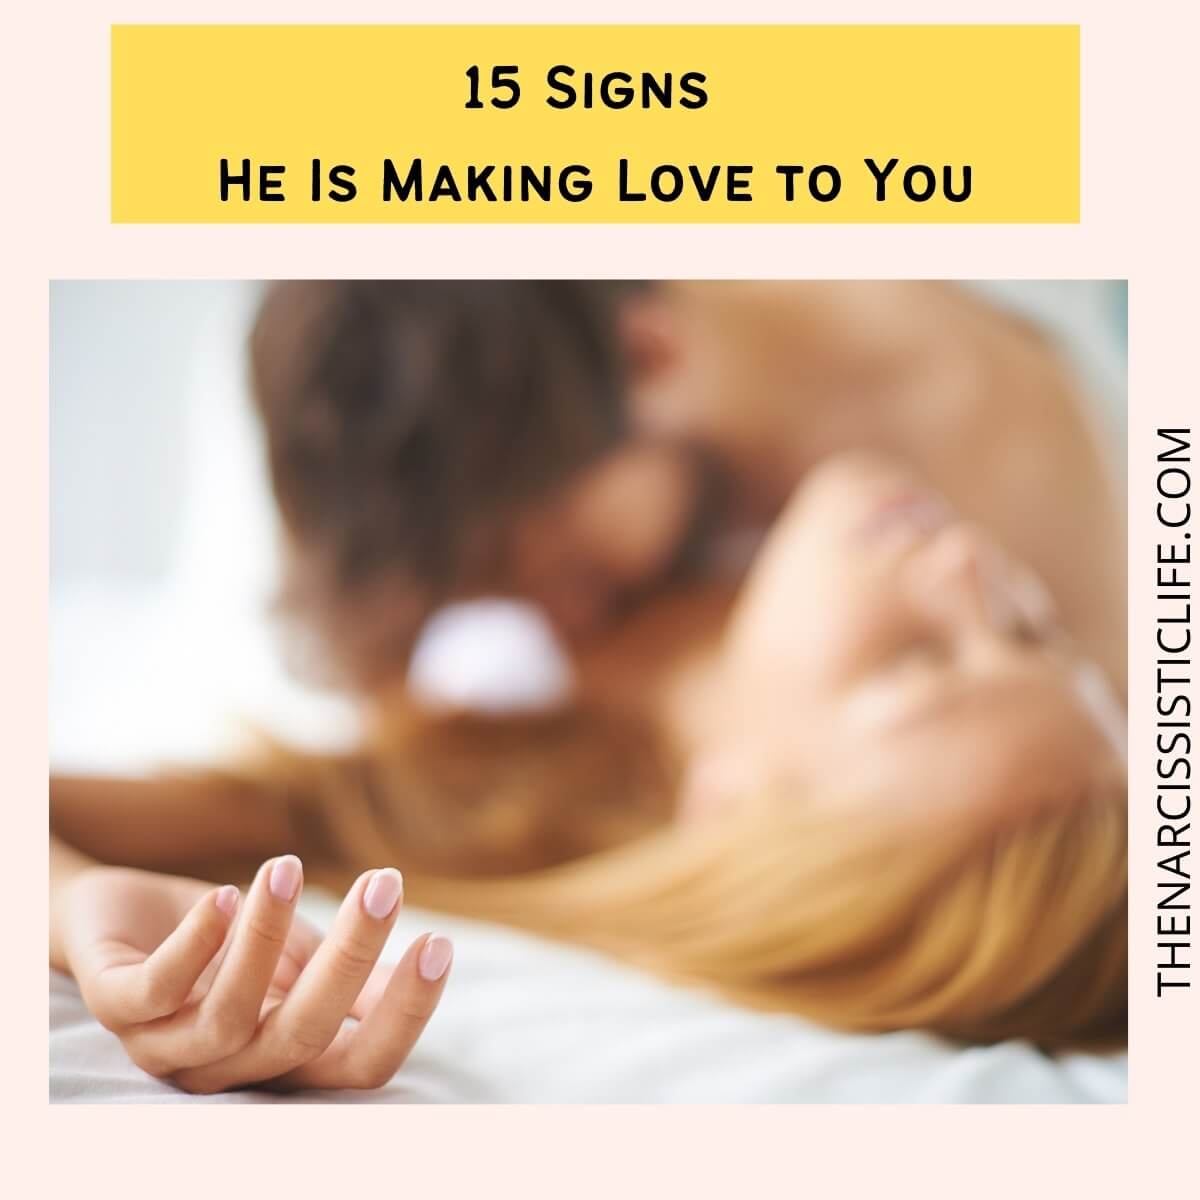 15 Sensual Signs He is Making Love to